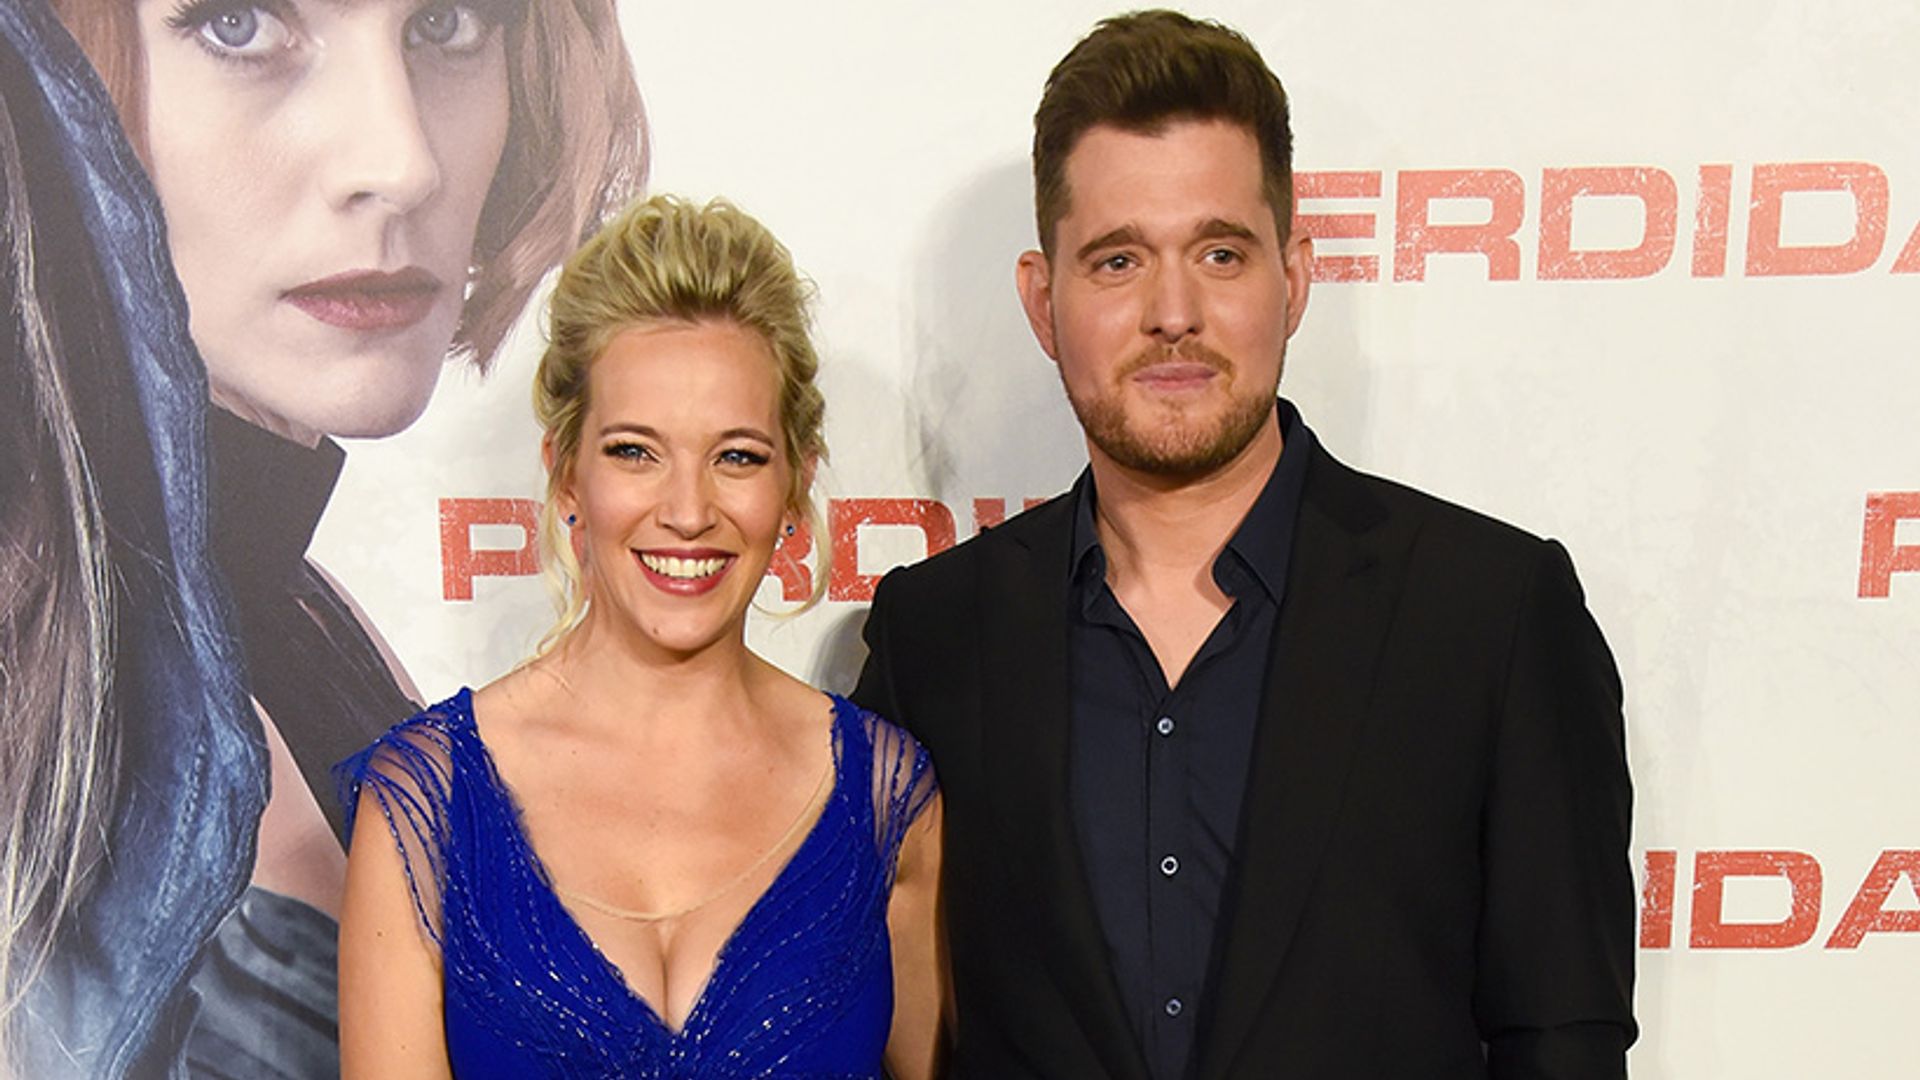 Michael Bublé and Luisana Lopilato welcome baby girl - find out her sweet name